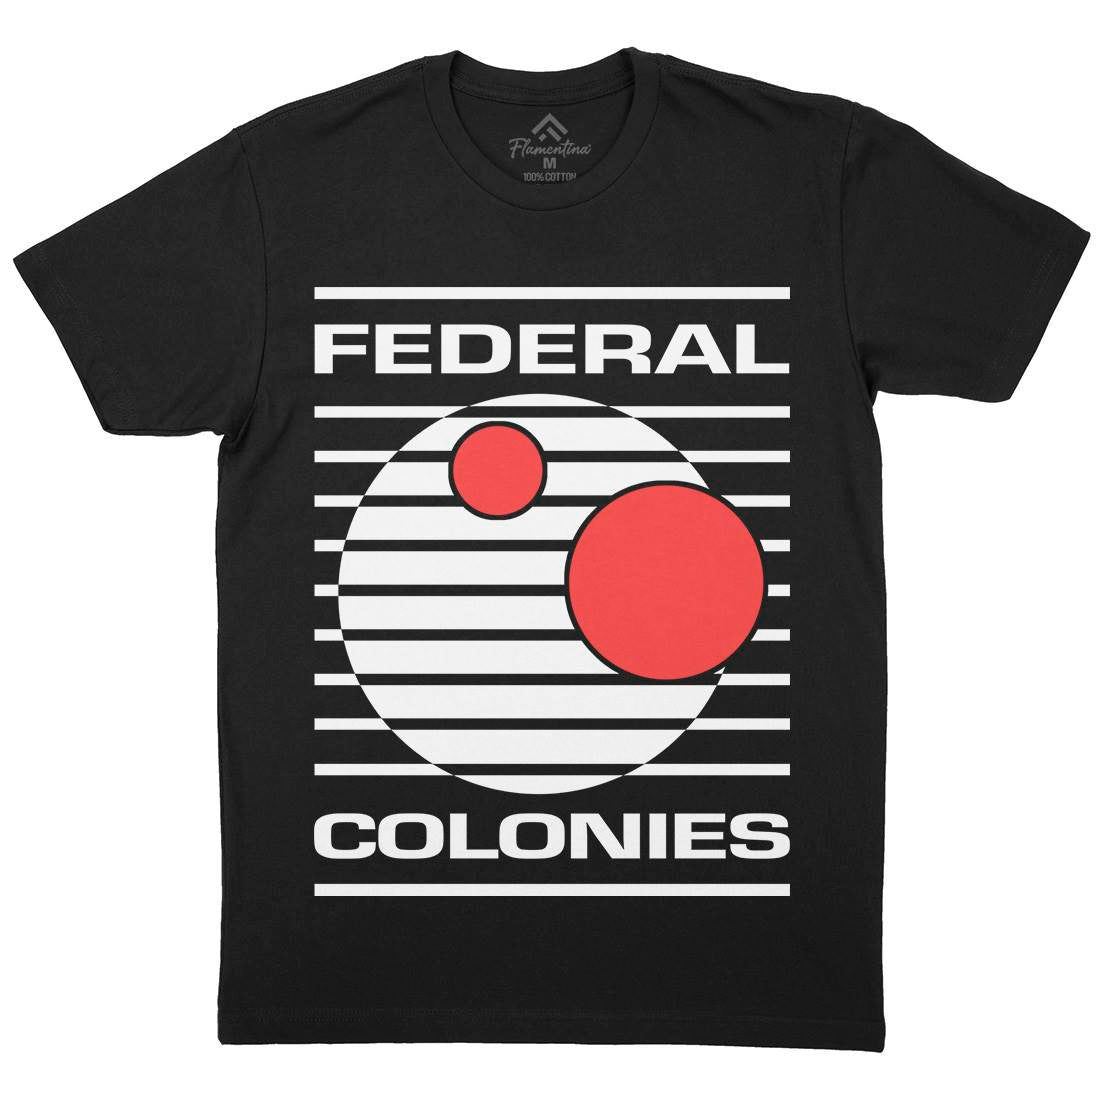 Federal Colonies Mens Crew Neck T-Shirt Space D409